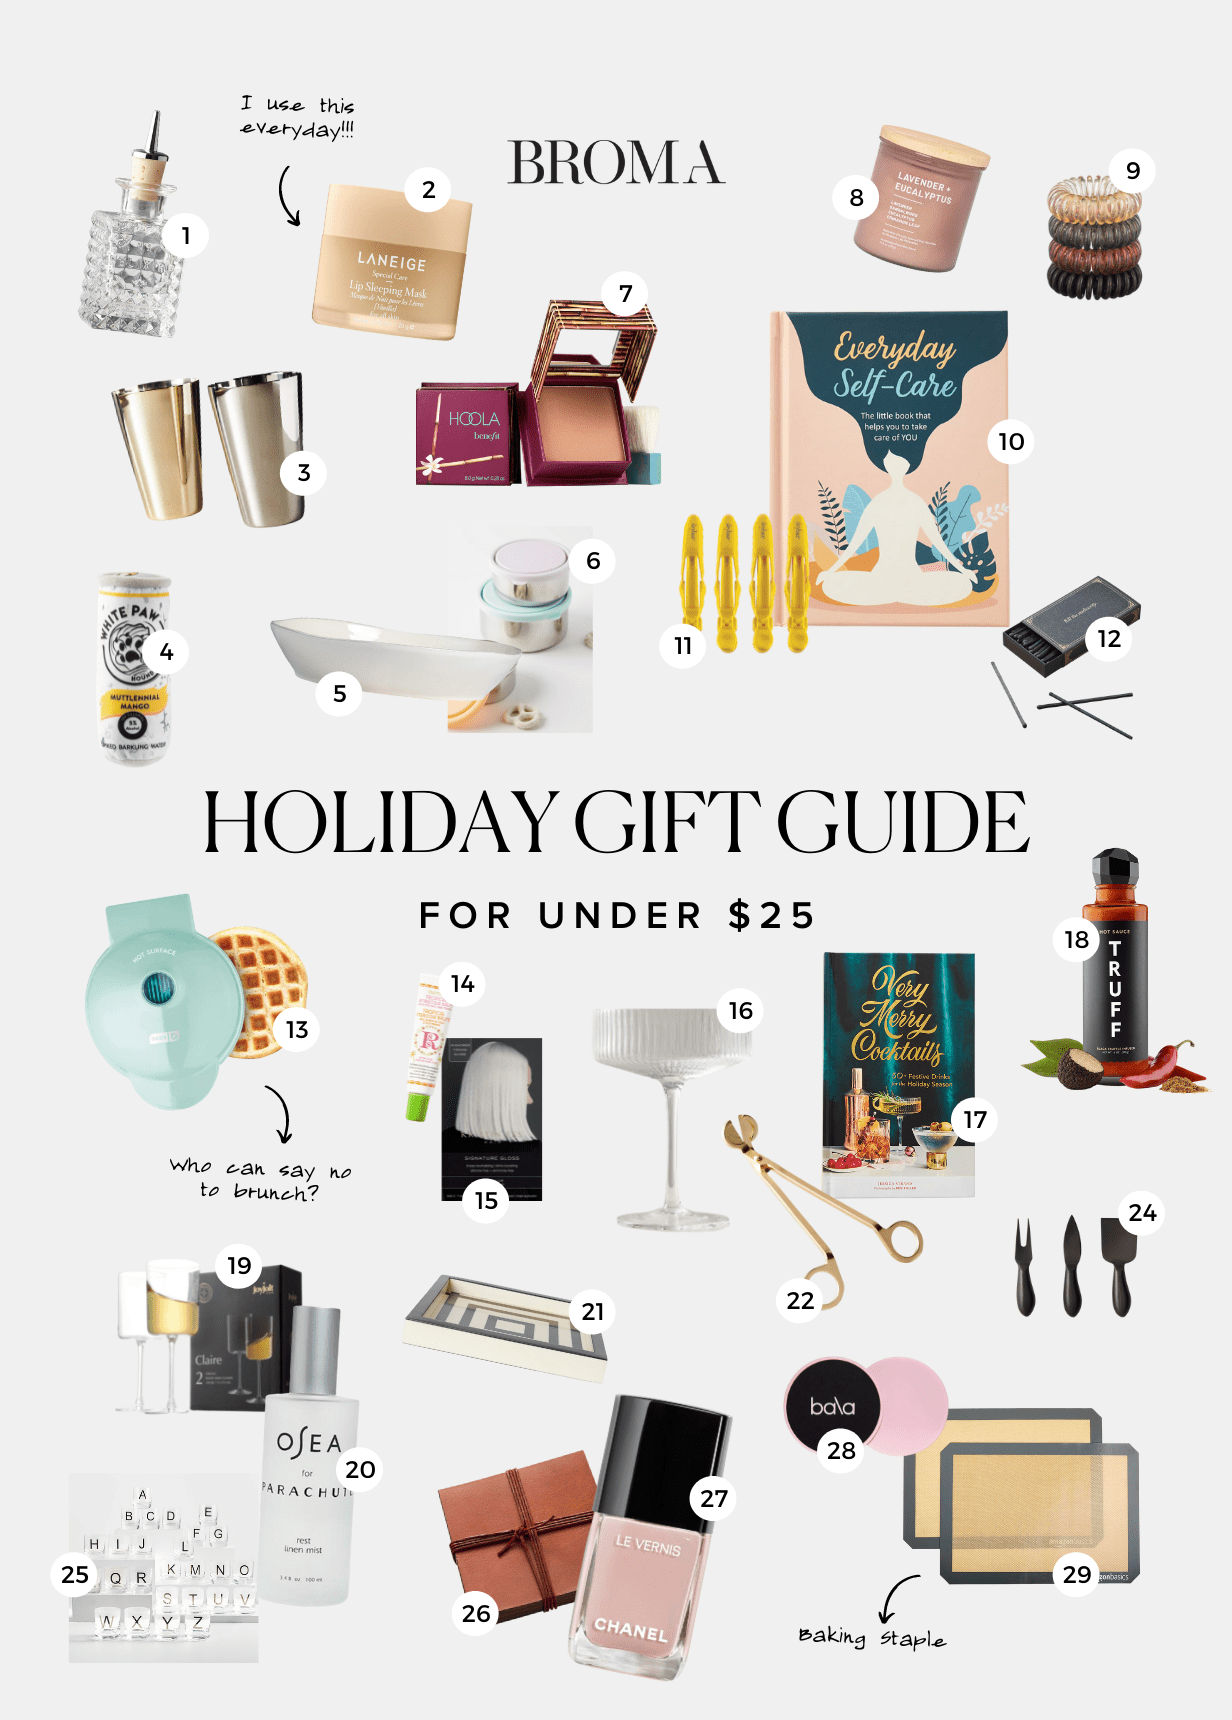 https://bromabakery.com/wp-content/uploads/2021/11/HOLIDAY-GIFT-GUIDE-7.webp